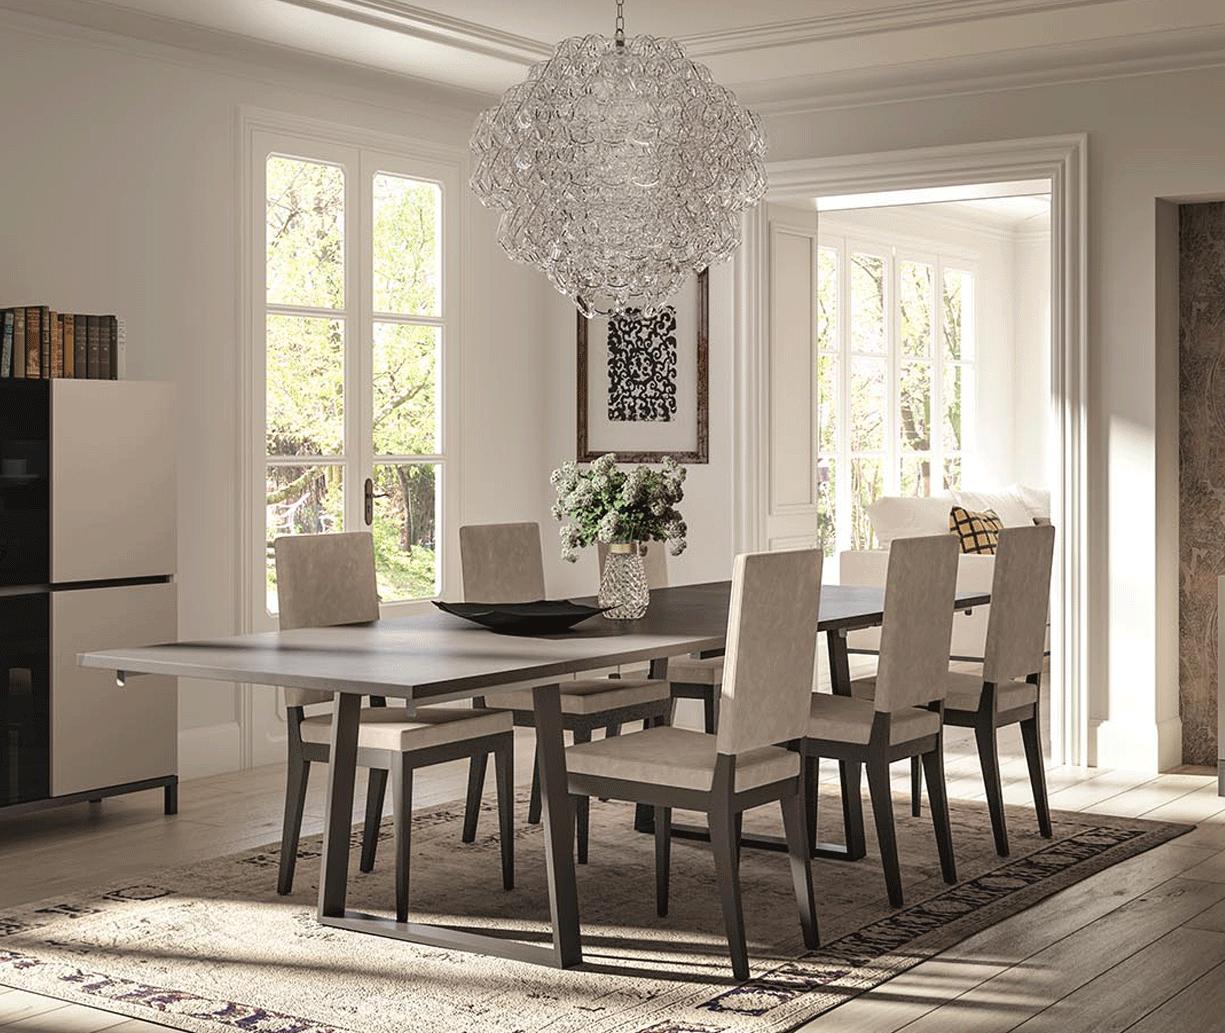 Contemporary, Modern Dining Table Set Kali Kali-Dining-7PC in Gray, Desert sand Eco-Leather